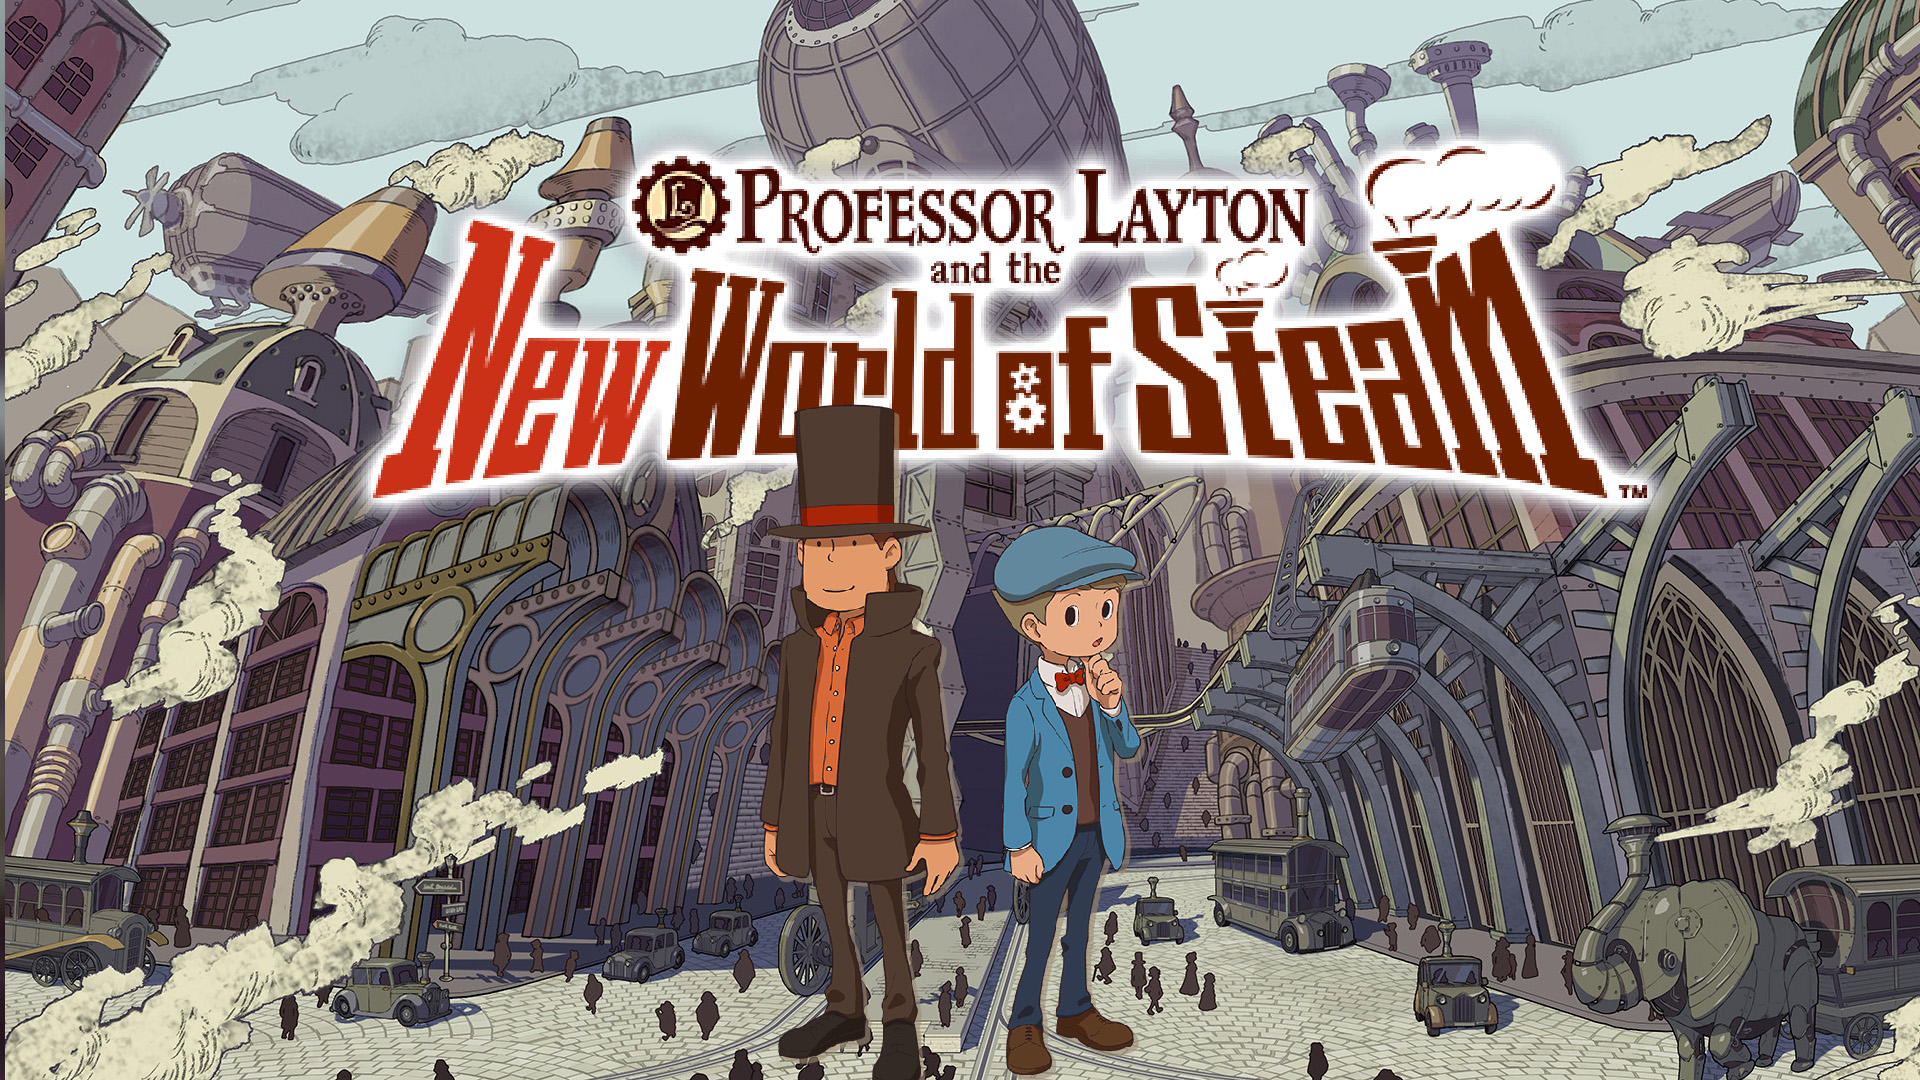 Professor Layton and the New World of steam –Teaser (Nintendo Switch) 